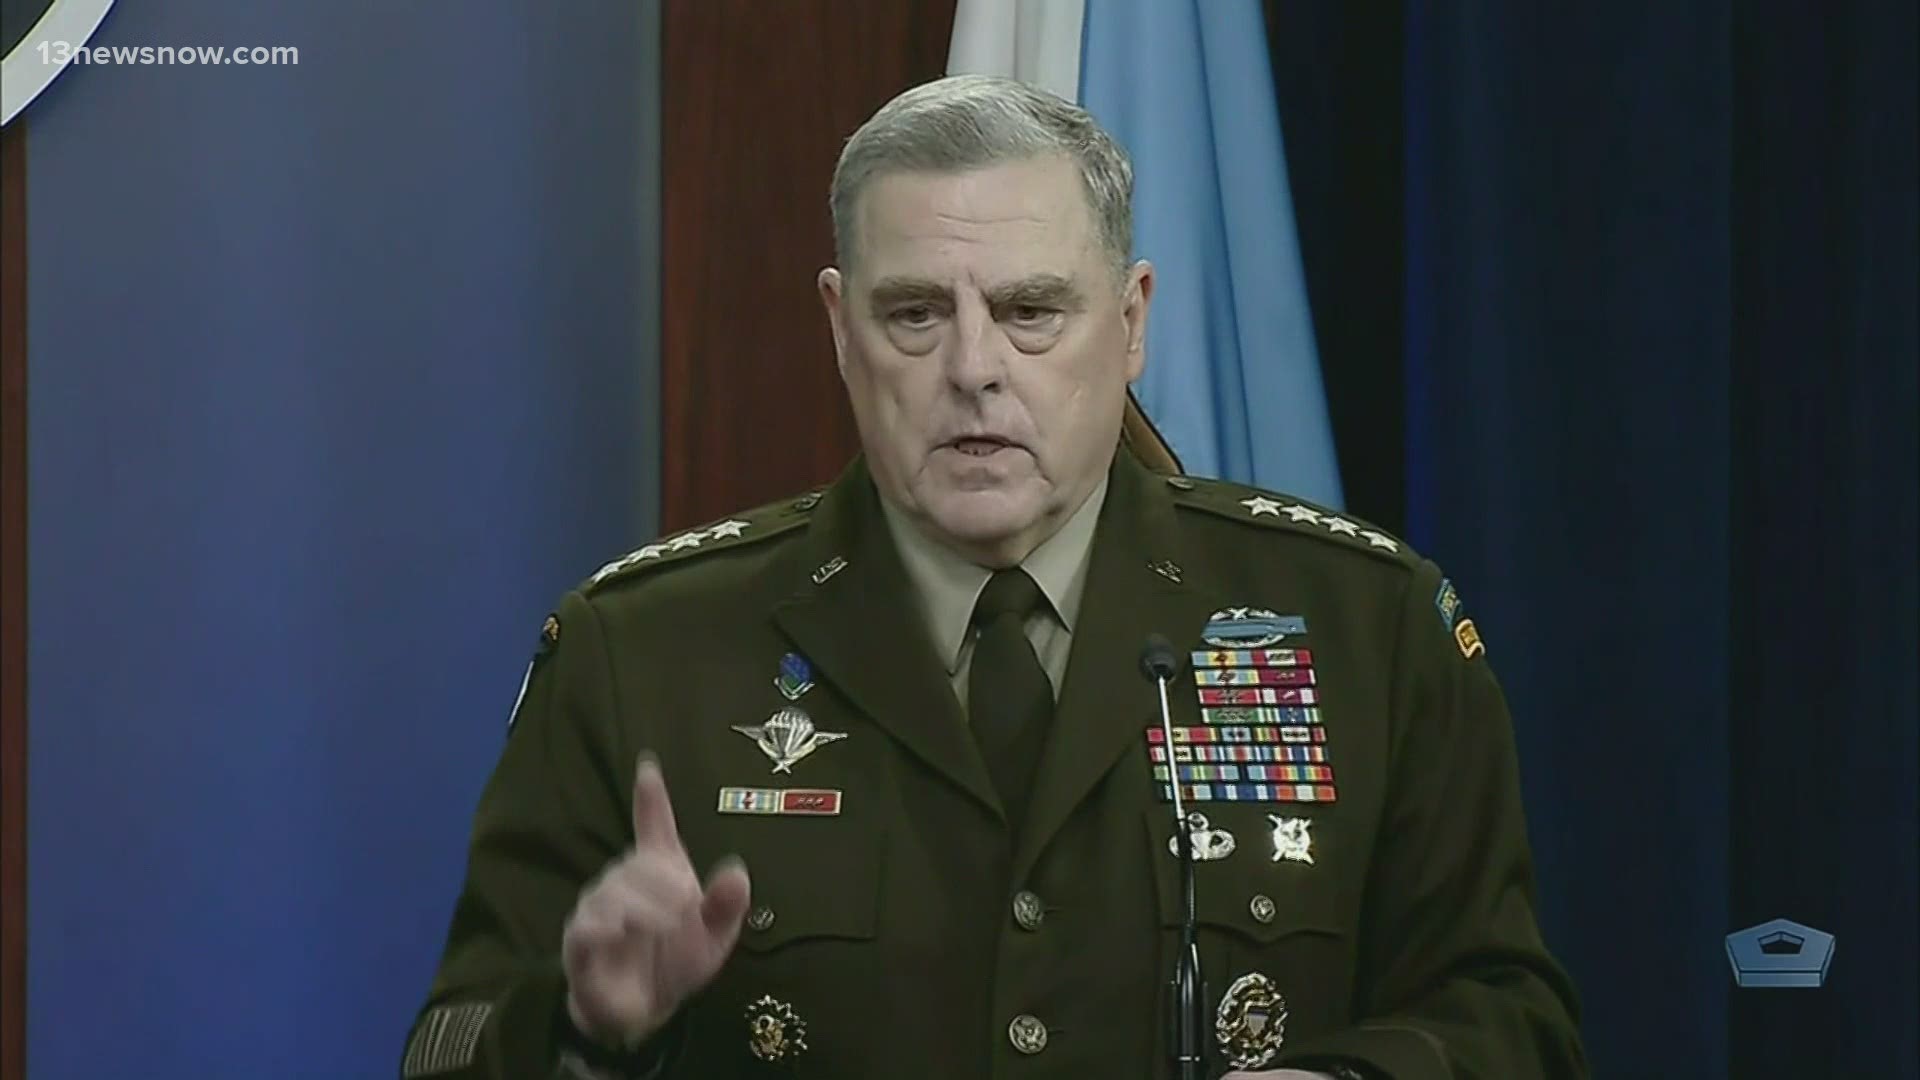 The book alleges General Mark Milley and the other Joint Chiefs were prepared to resign rather than carry out illegal orders from former Pres. Trump.